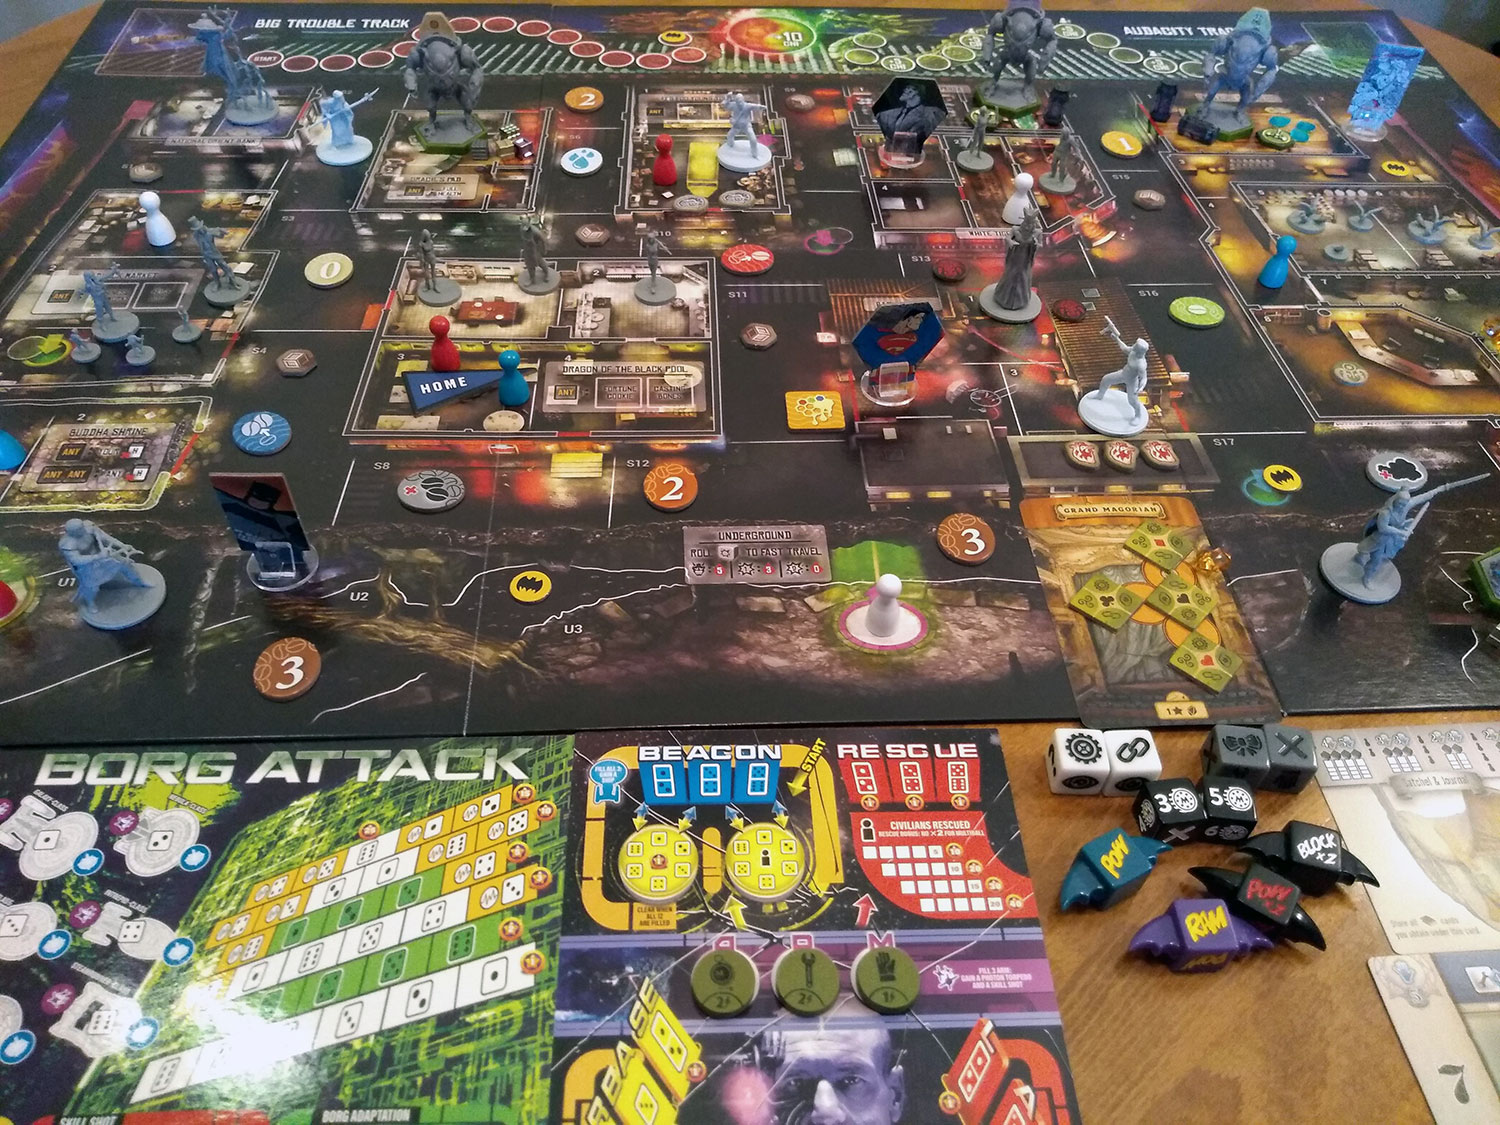 49 Remarkable Single Player Games For Your Solo Gaming Sessions